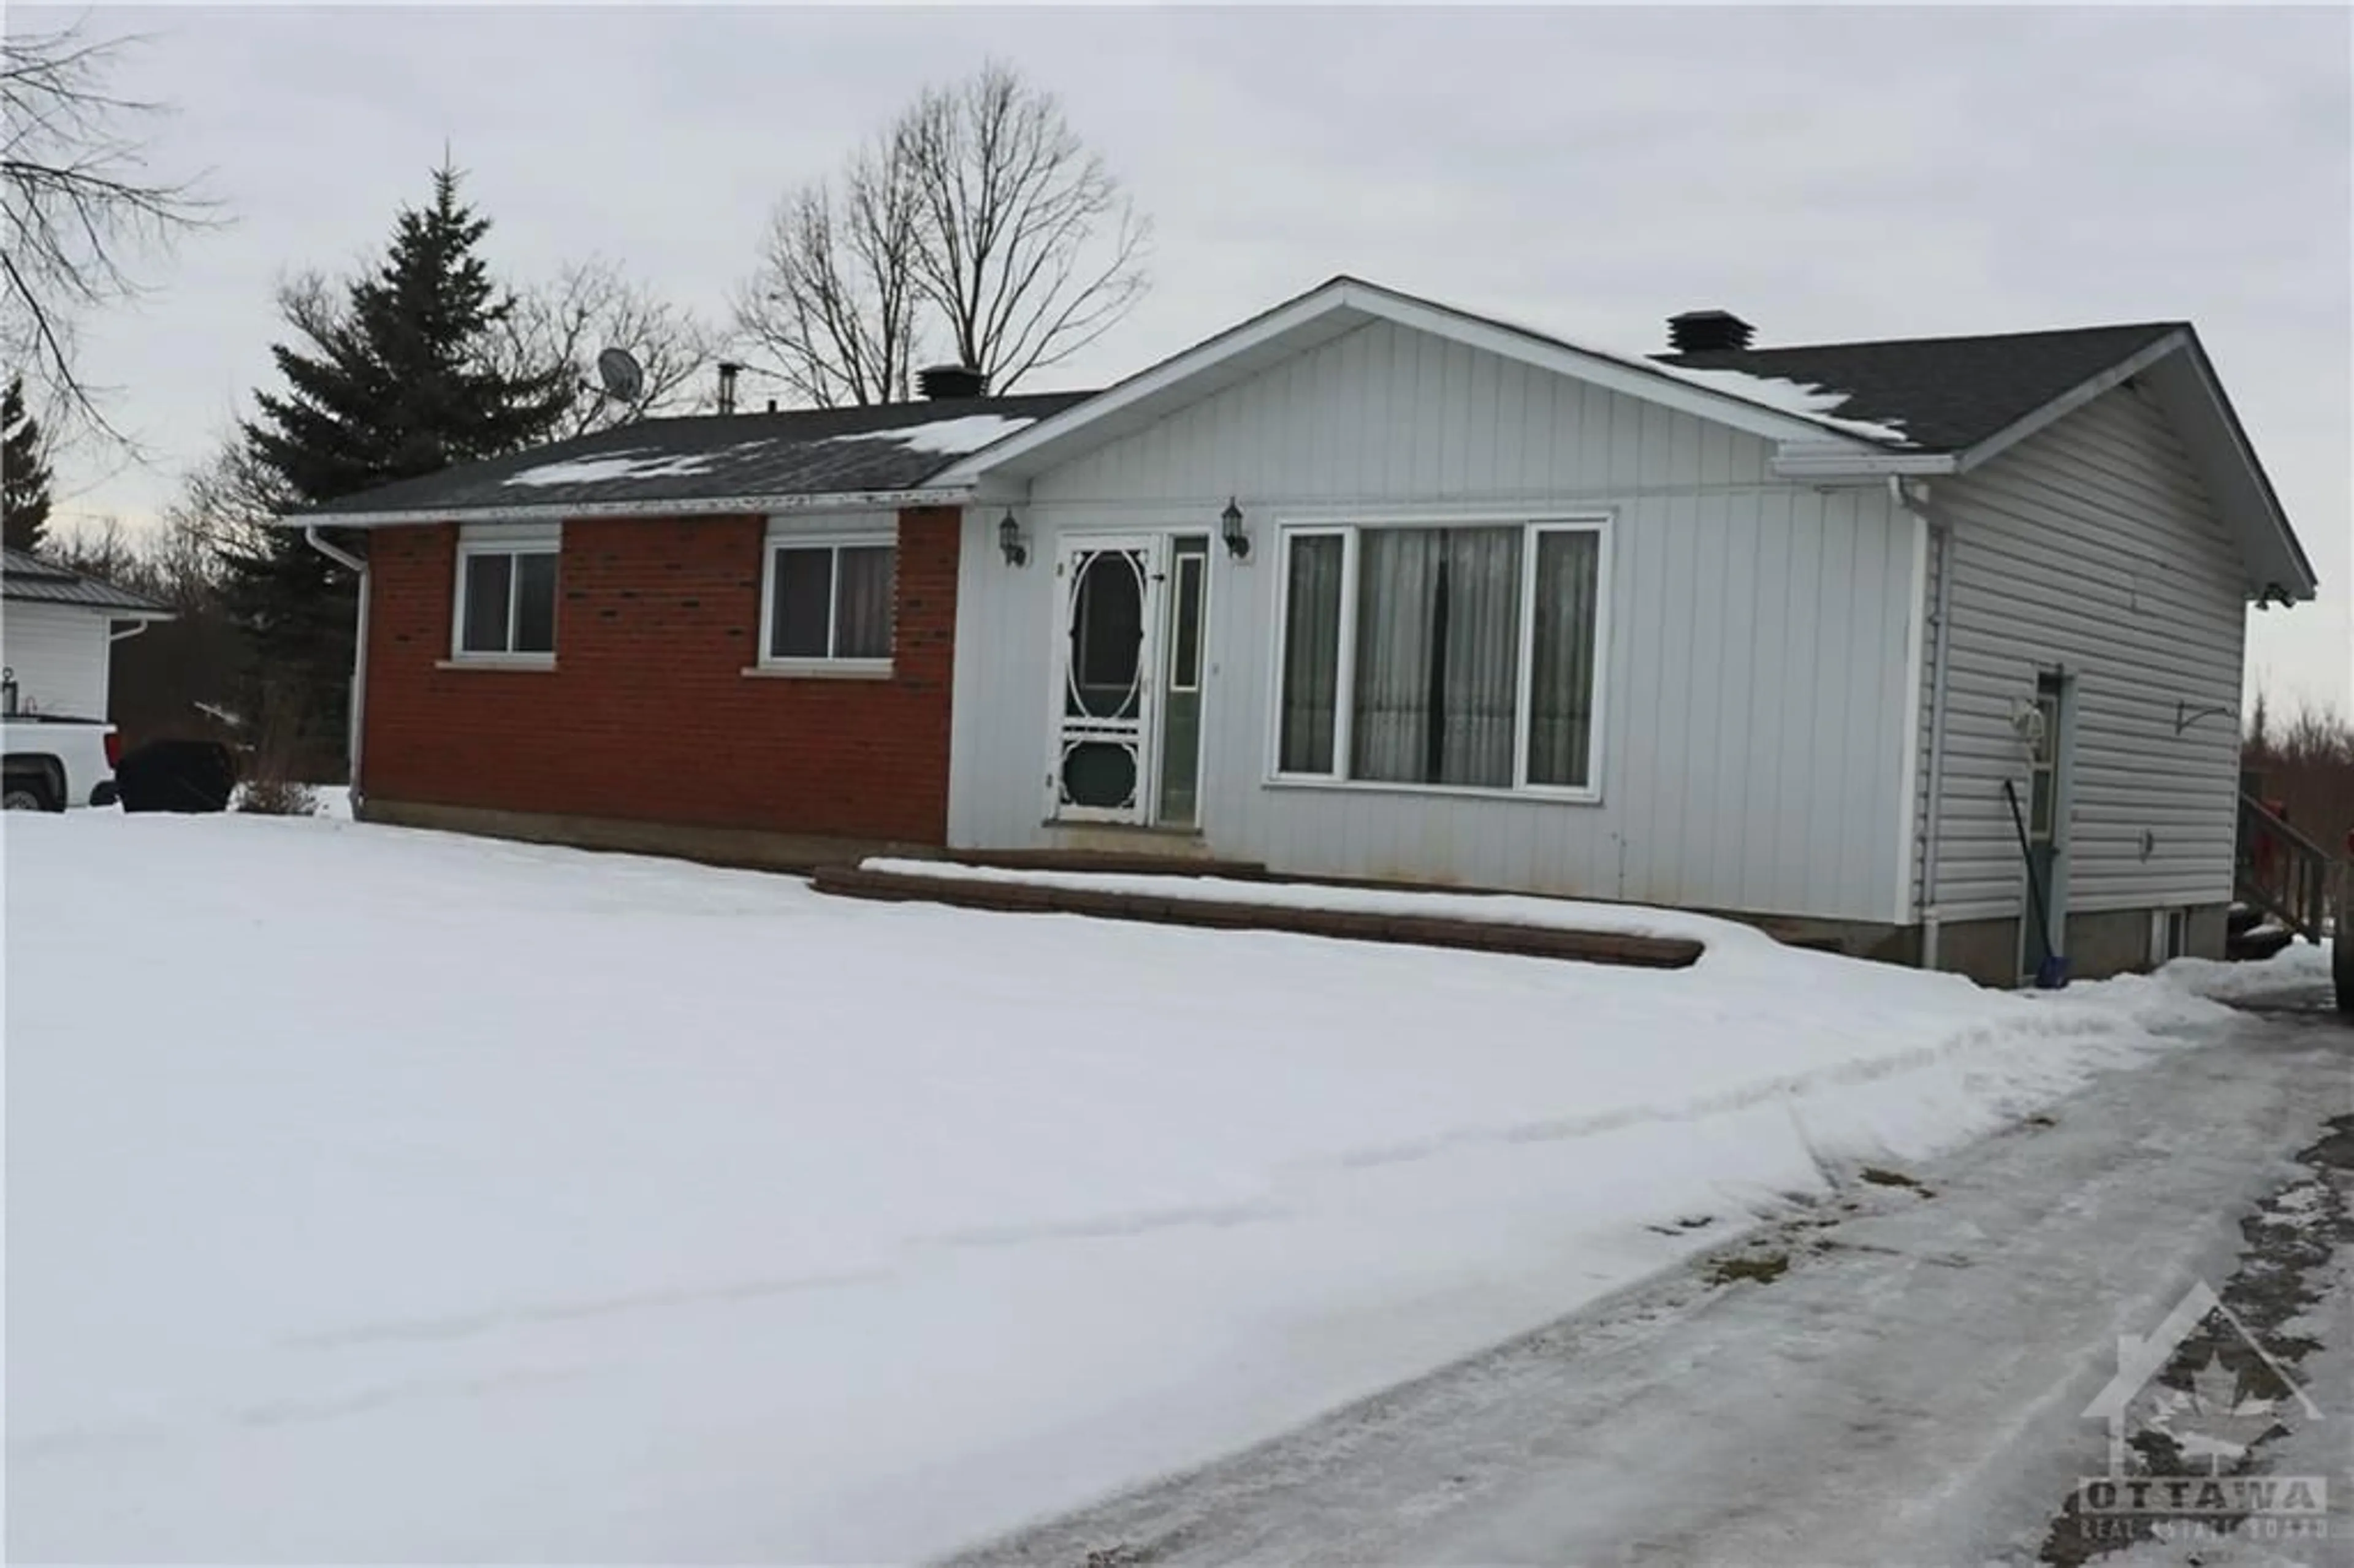 Home with unknown exterior material for 6772 Roger Stevens Dr, Smiths Falls Ontario K7A 4S6